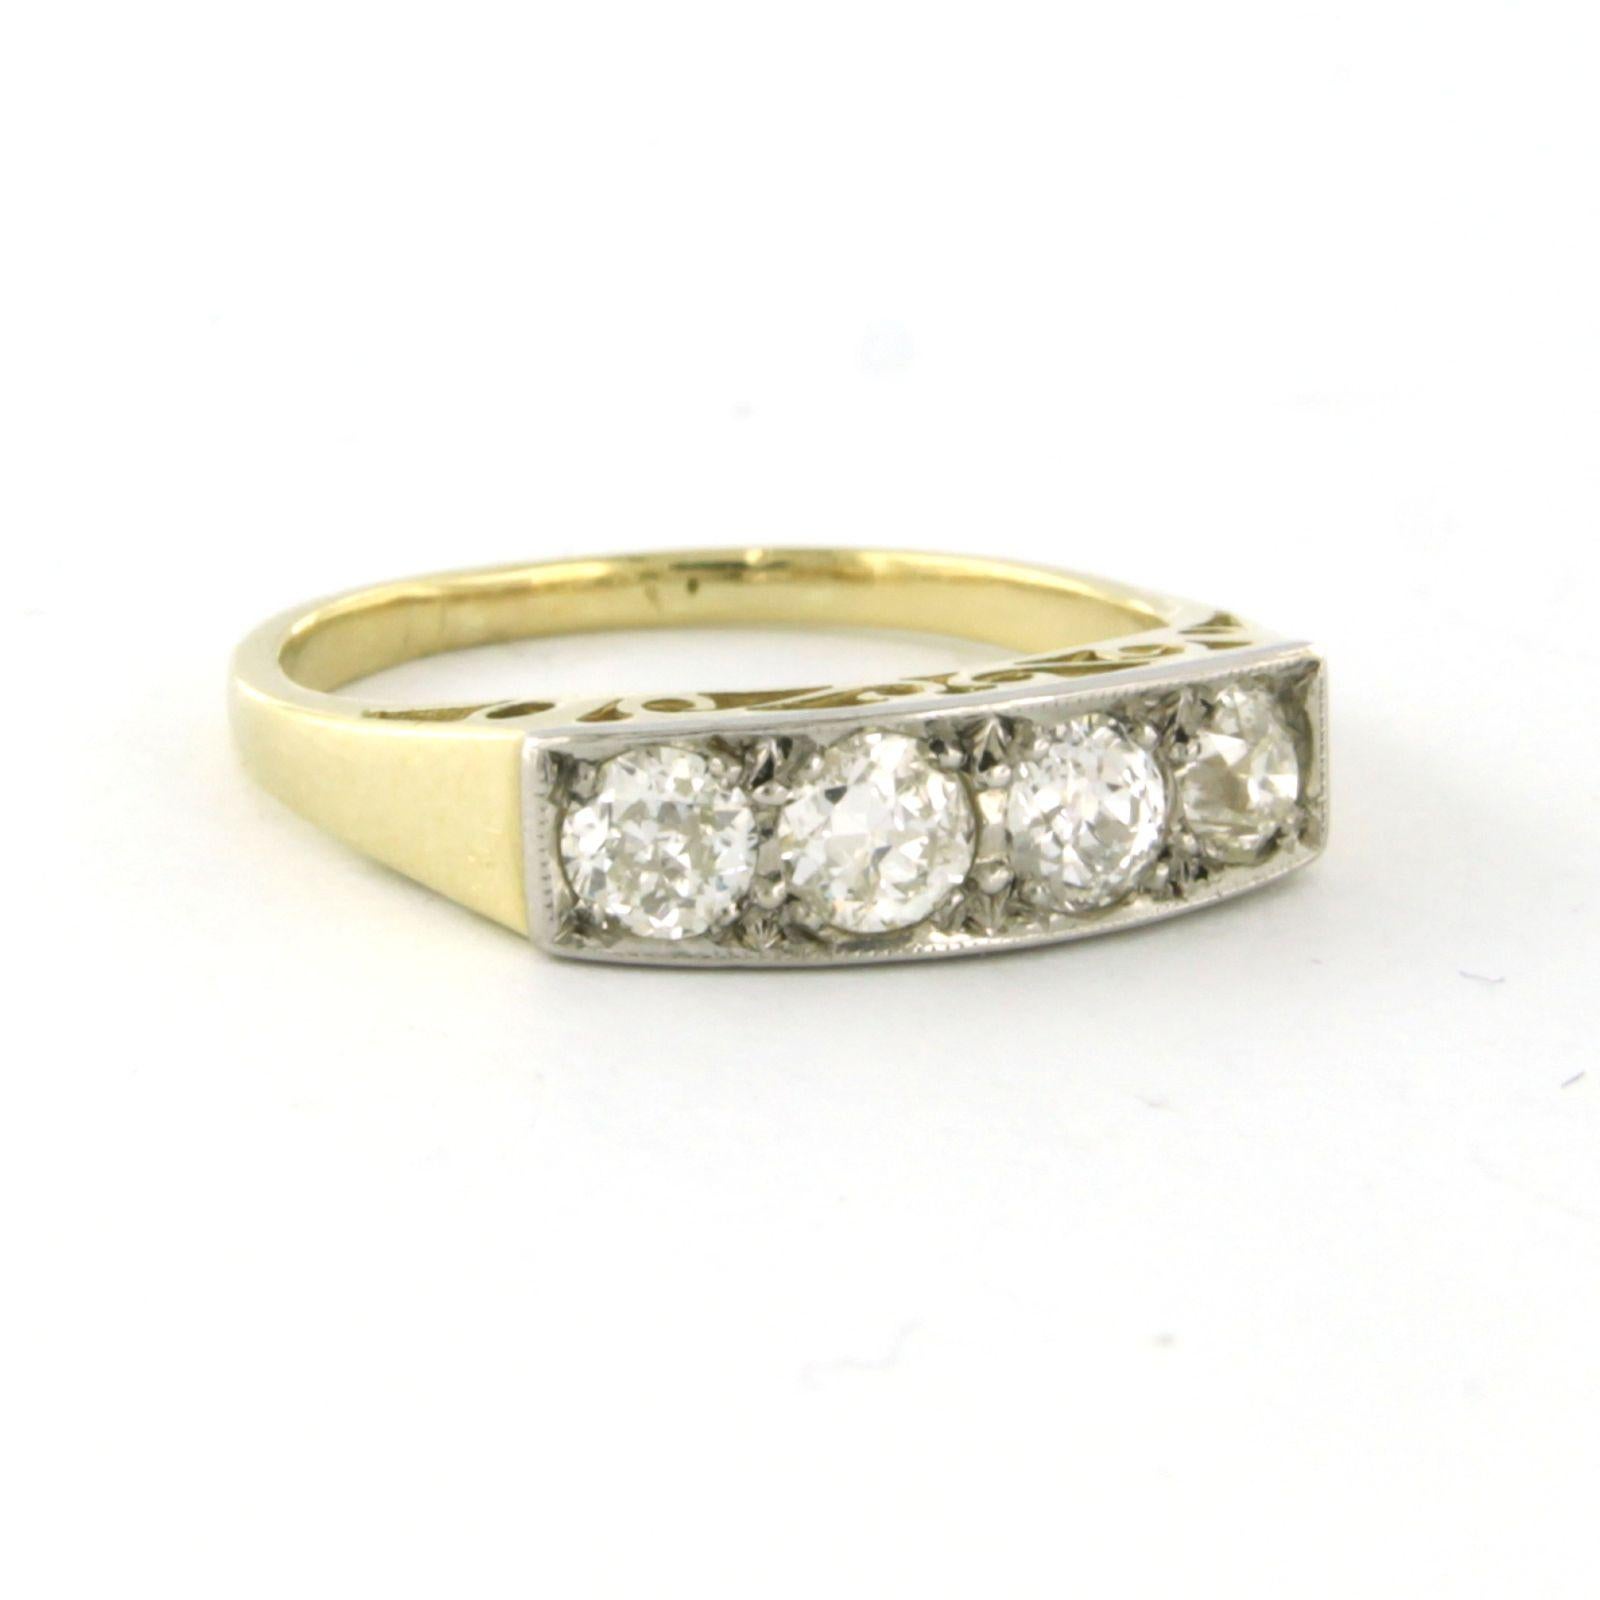 Old Mine Cut Ring set with old mine cut Diamonds 14k bicolour gold